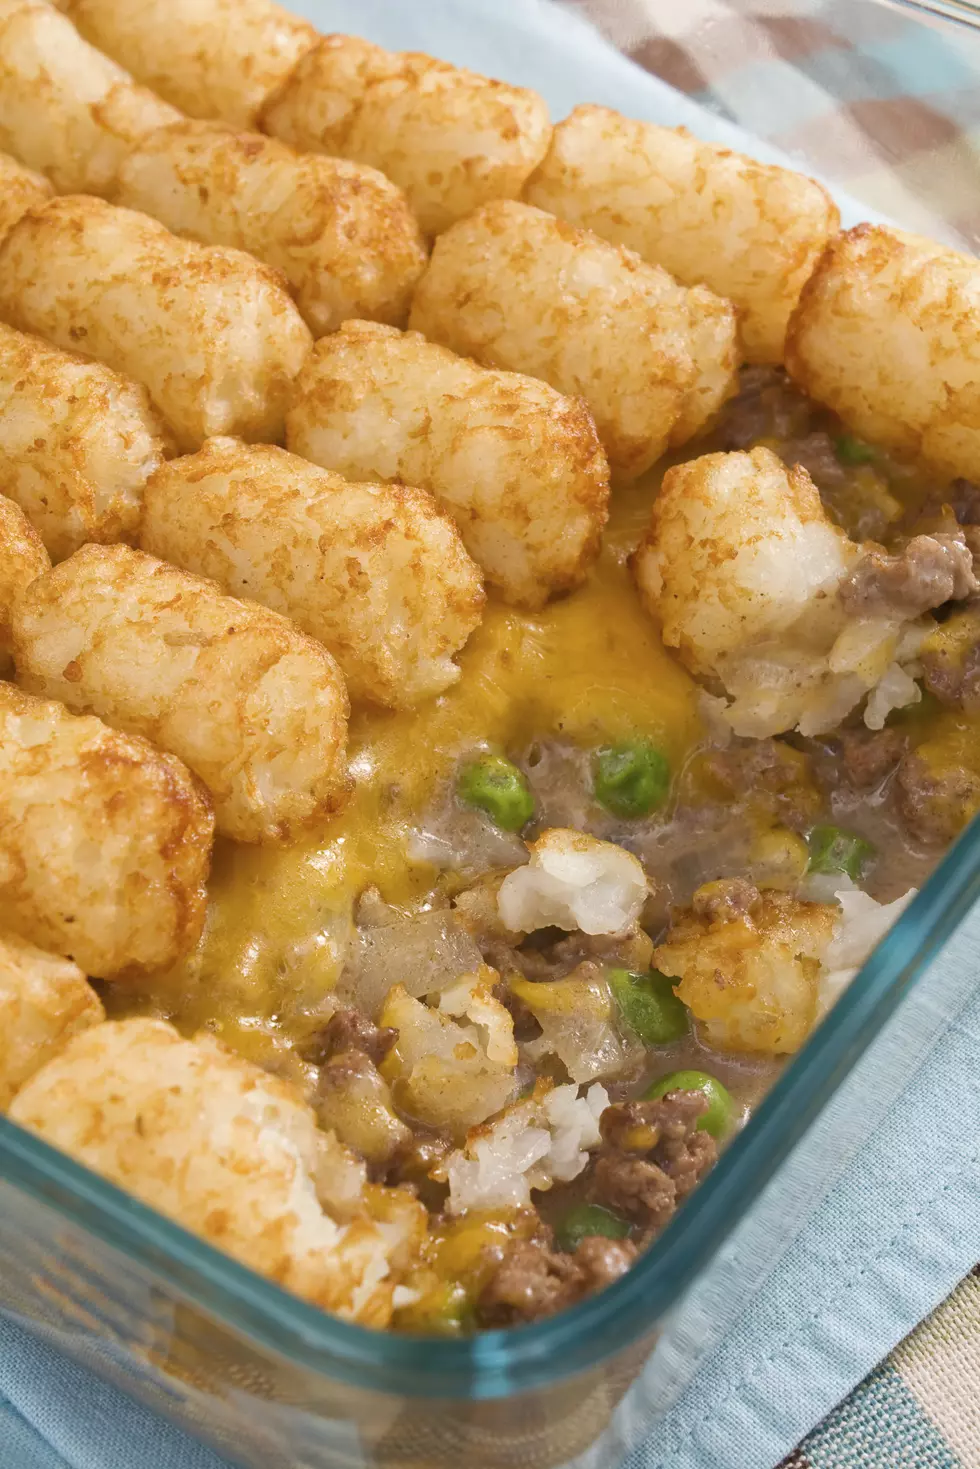 Hot dish, or Tater-Tot Casserole, Are You a Fan?